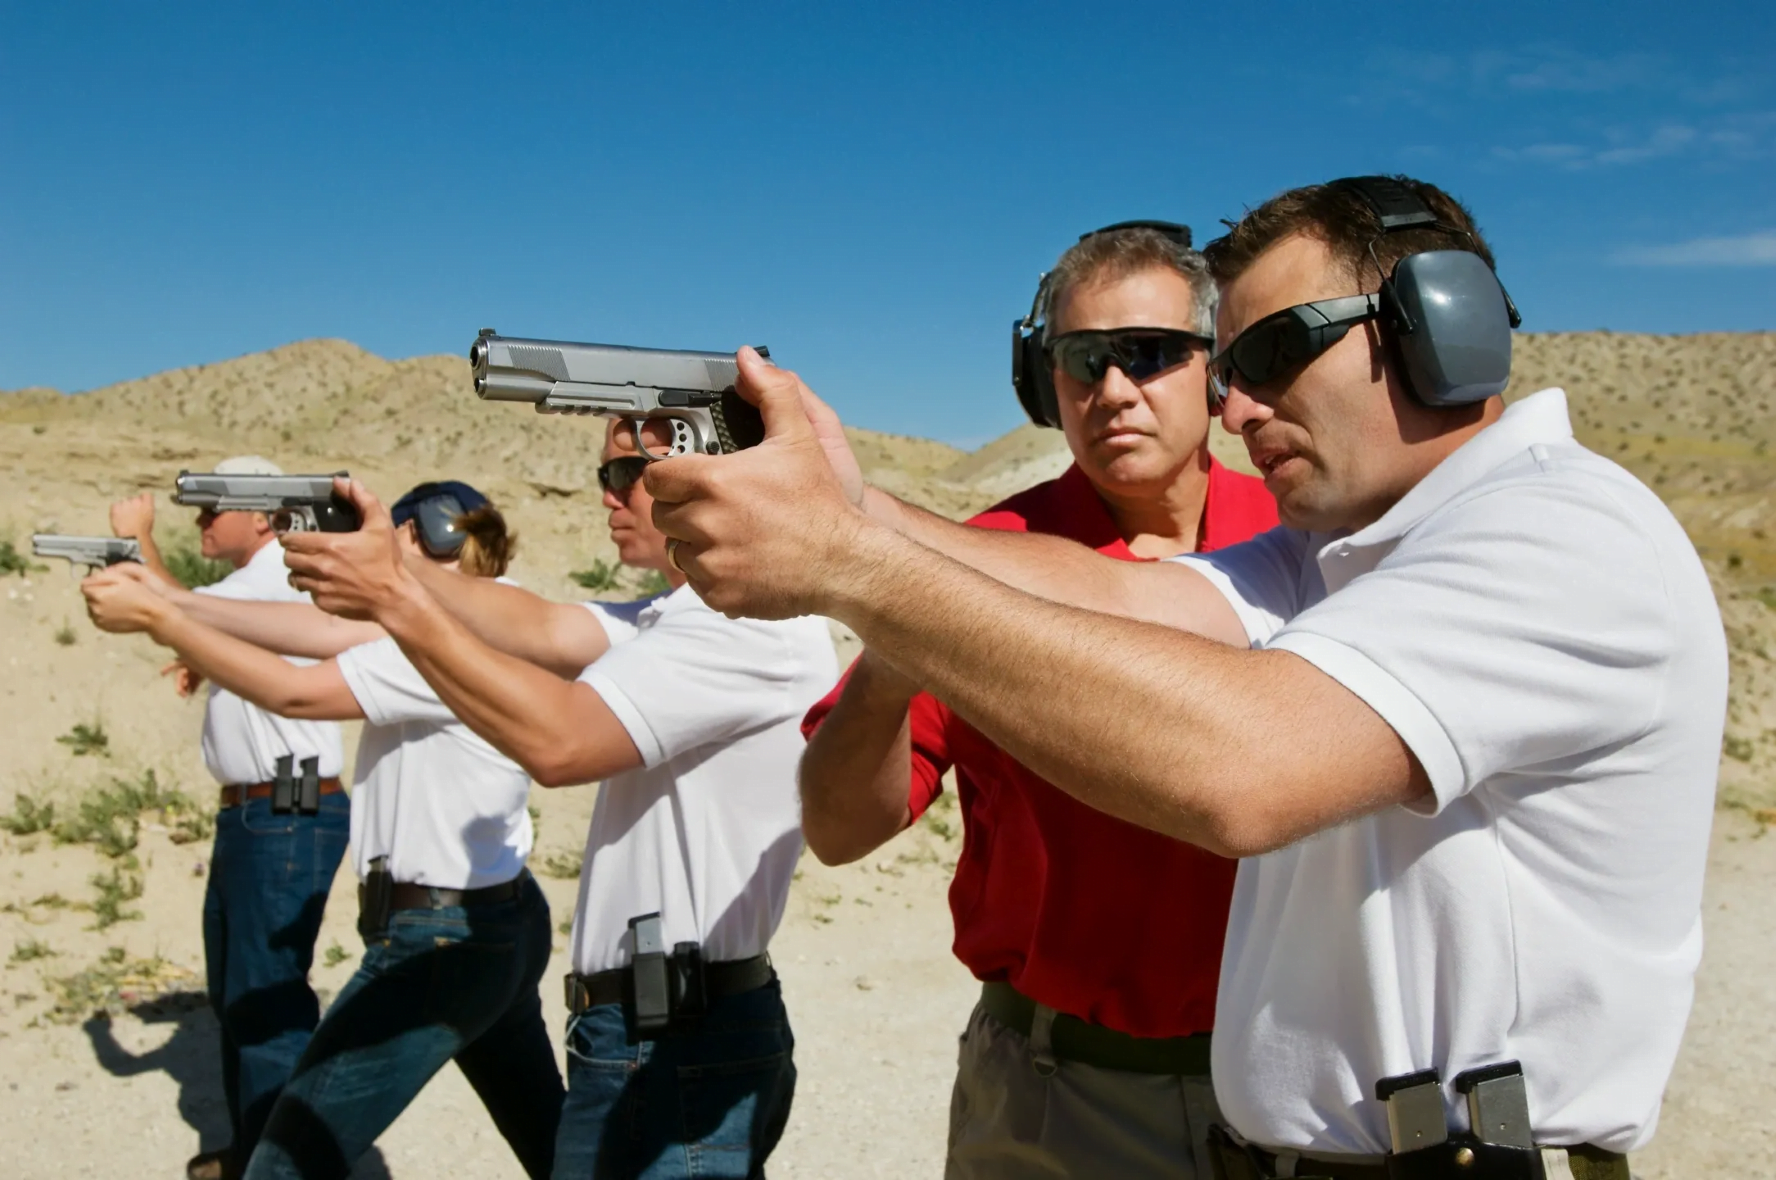 Instruction at an outdoor range